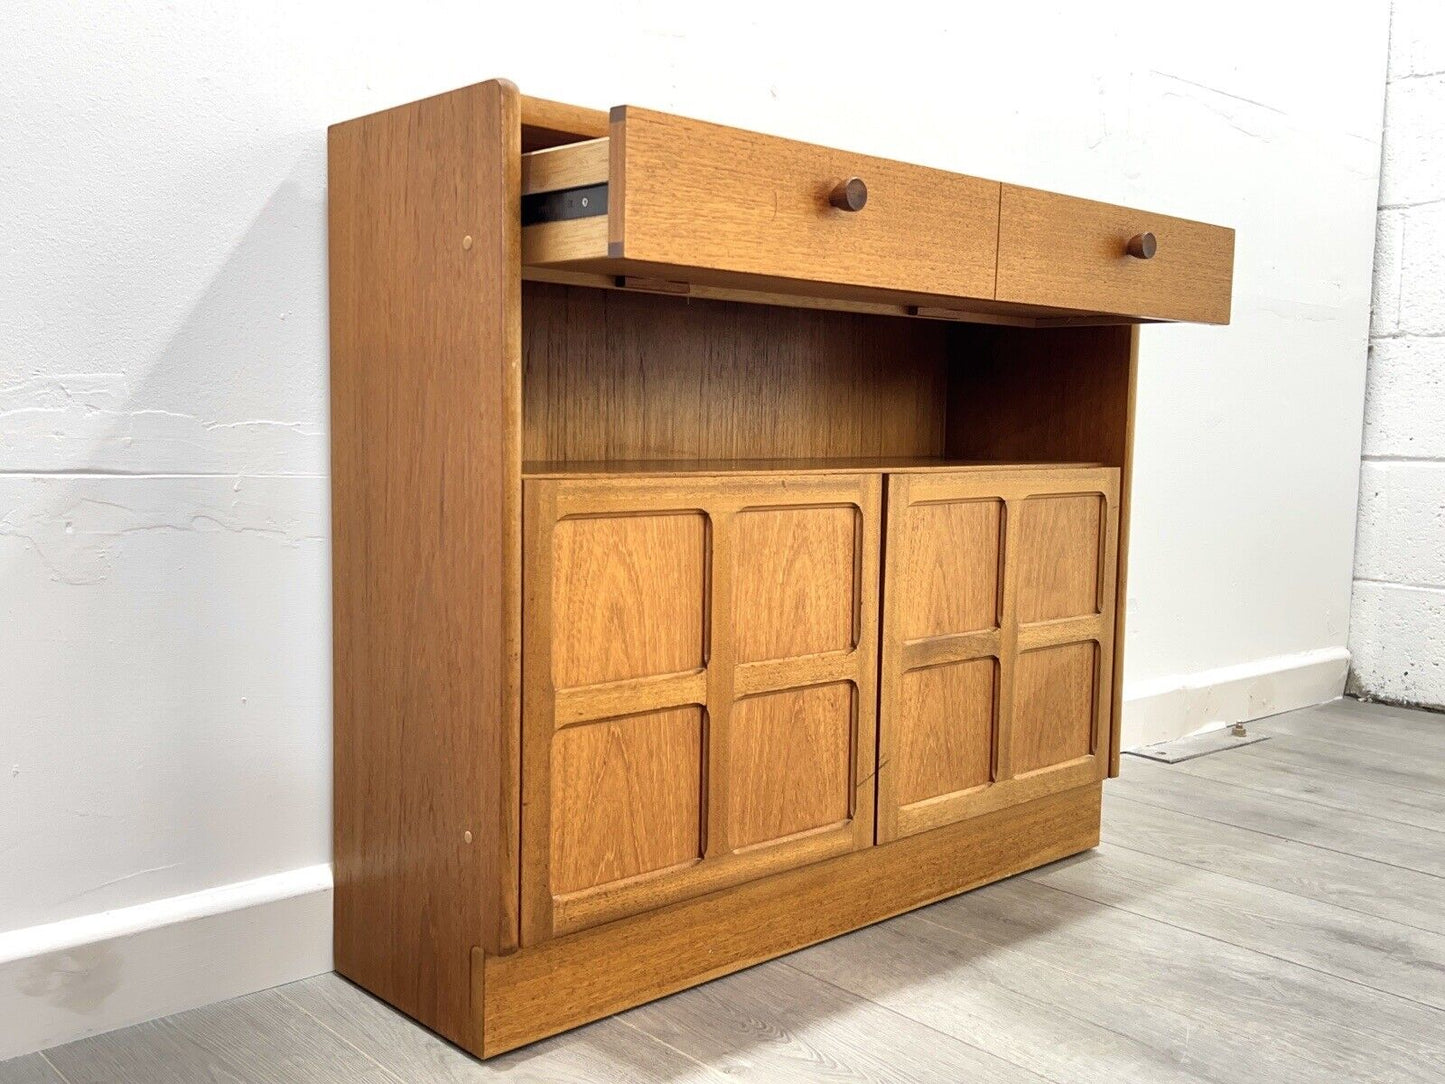 Nathan / Parker Knoll Squares, Mid Century Cupboard / Compact Sideboard